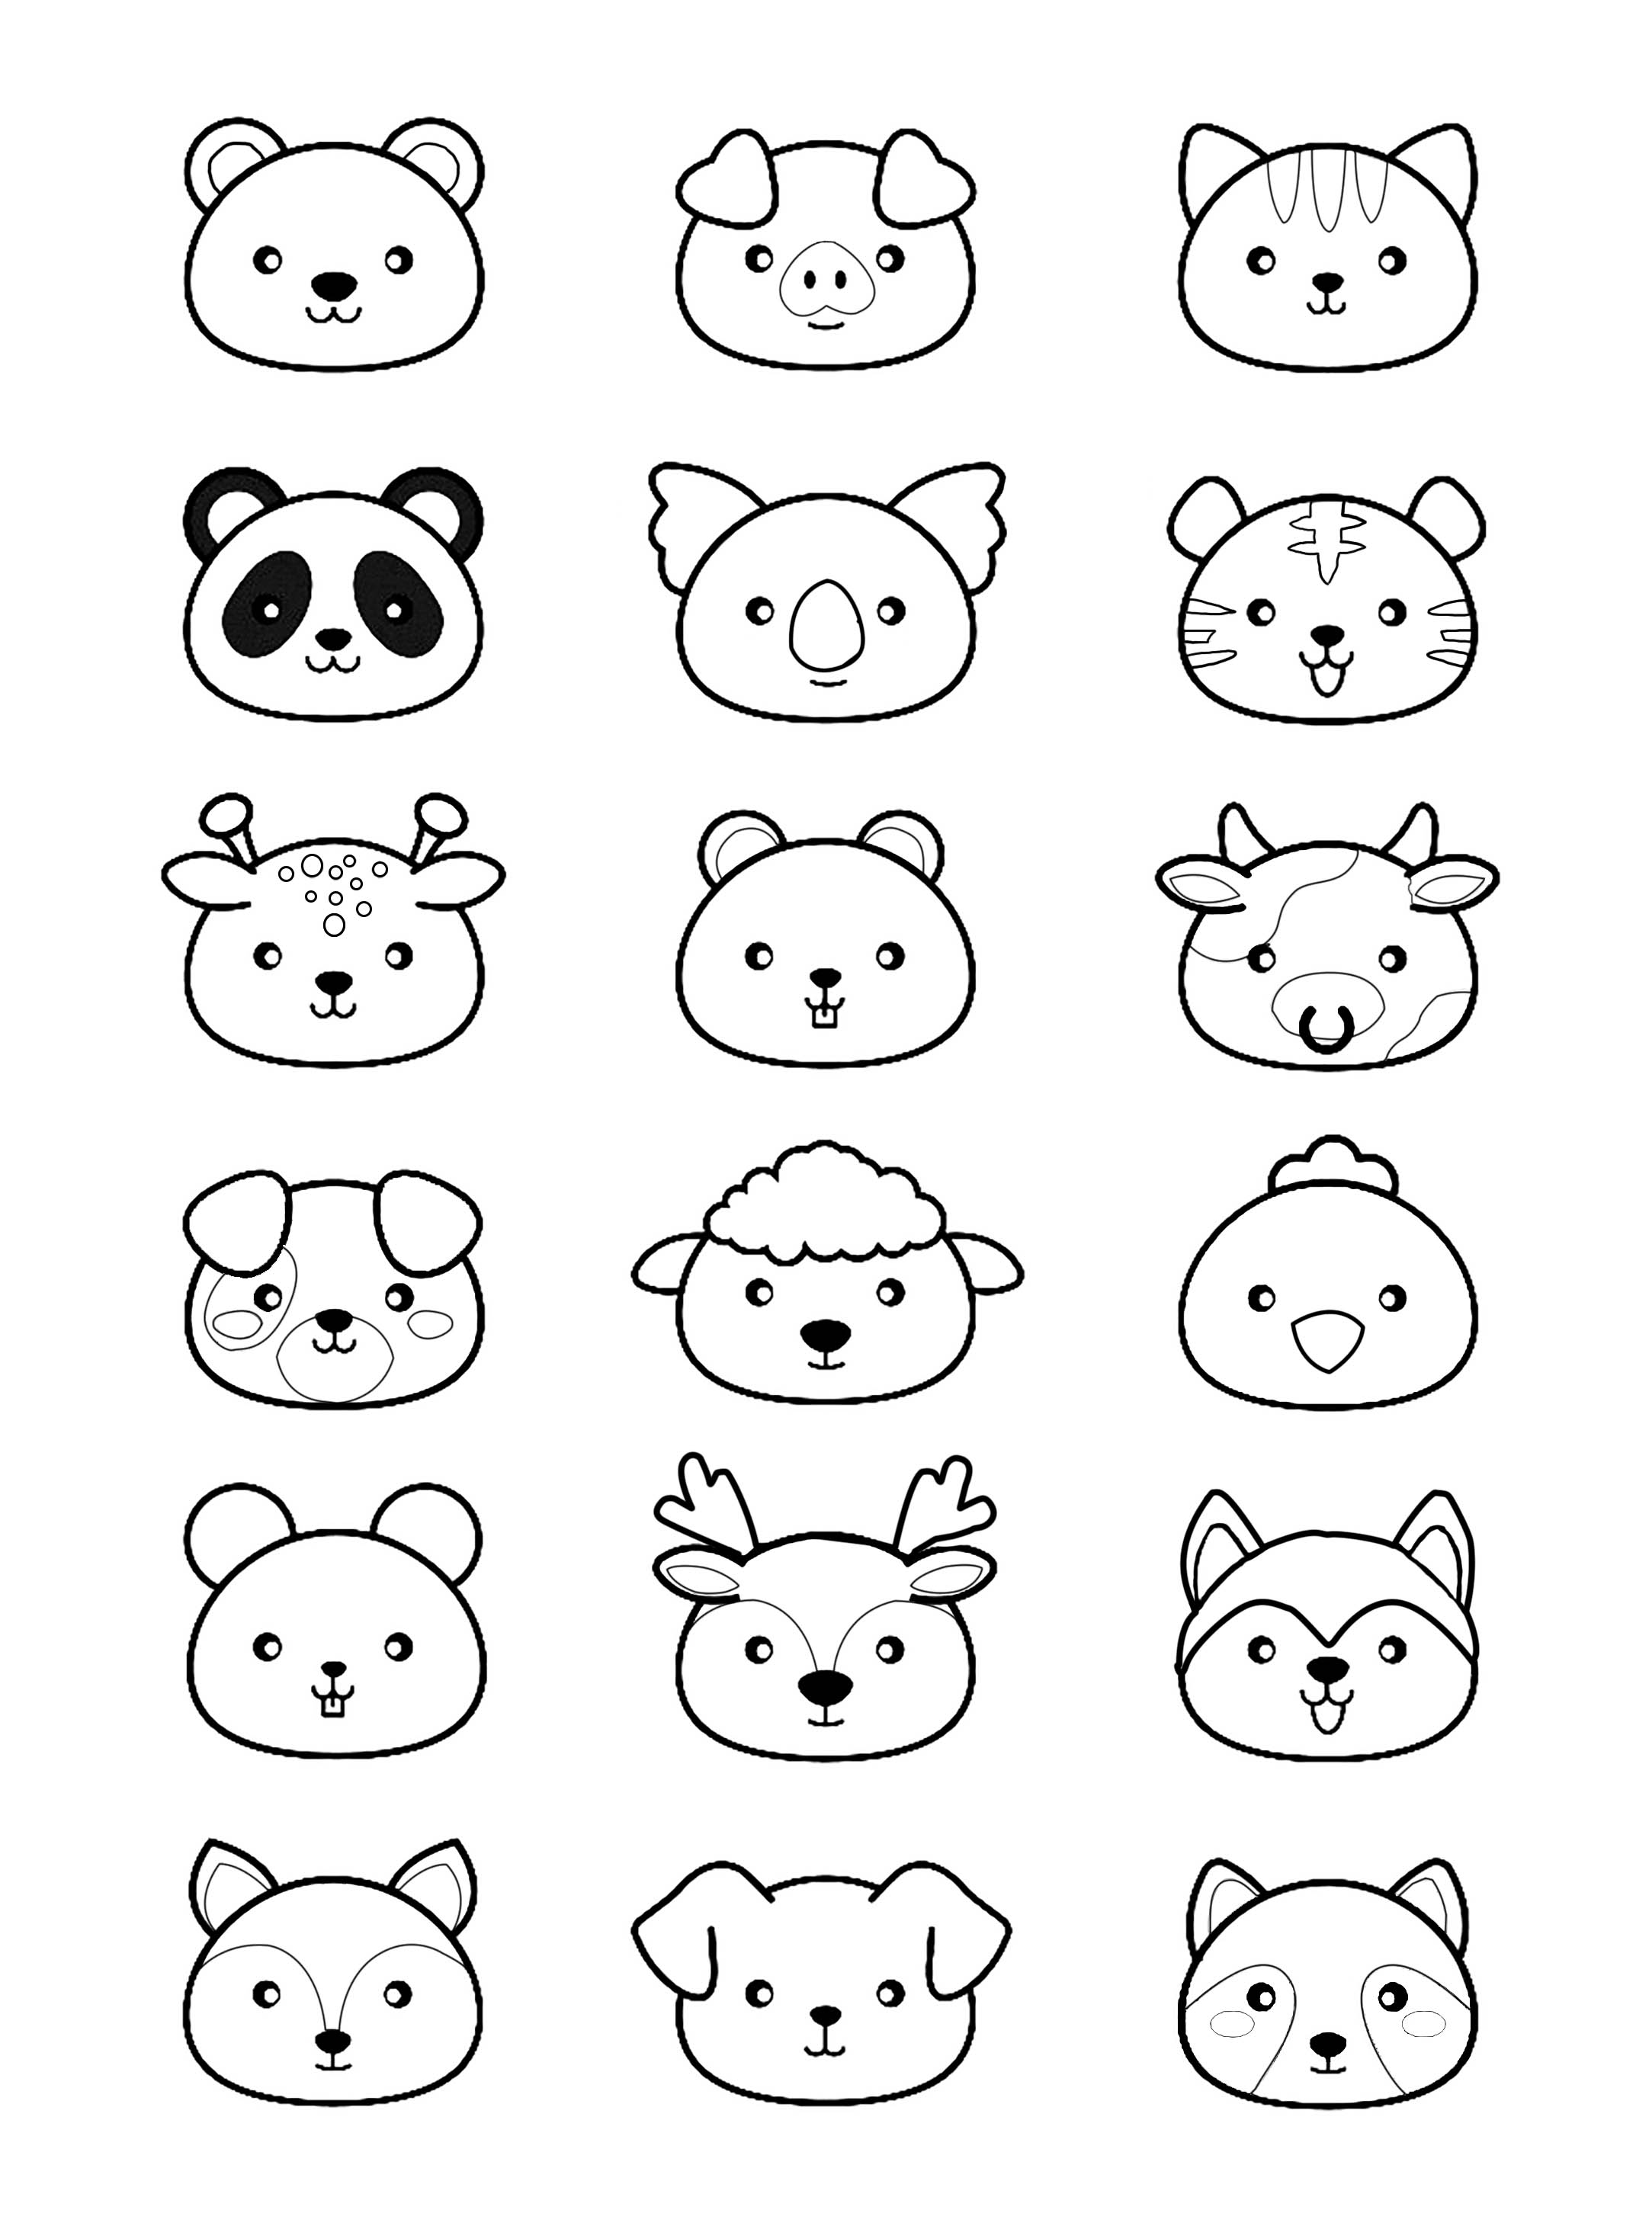 Kawaii animals - P&a Adult Coloring Pages